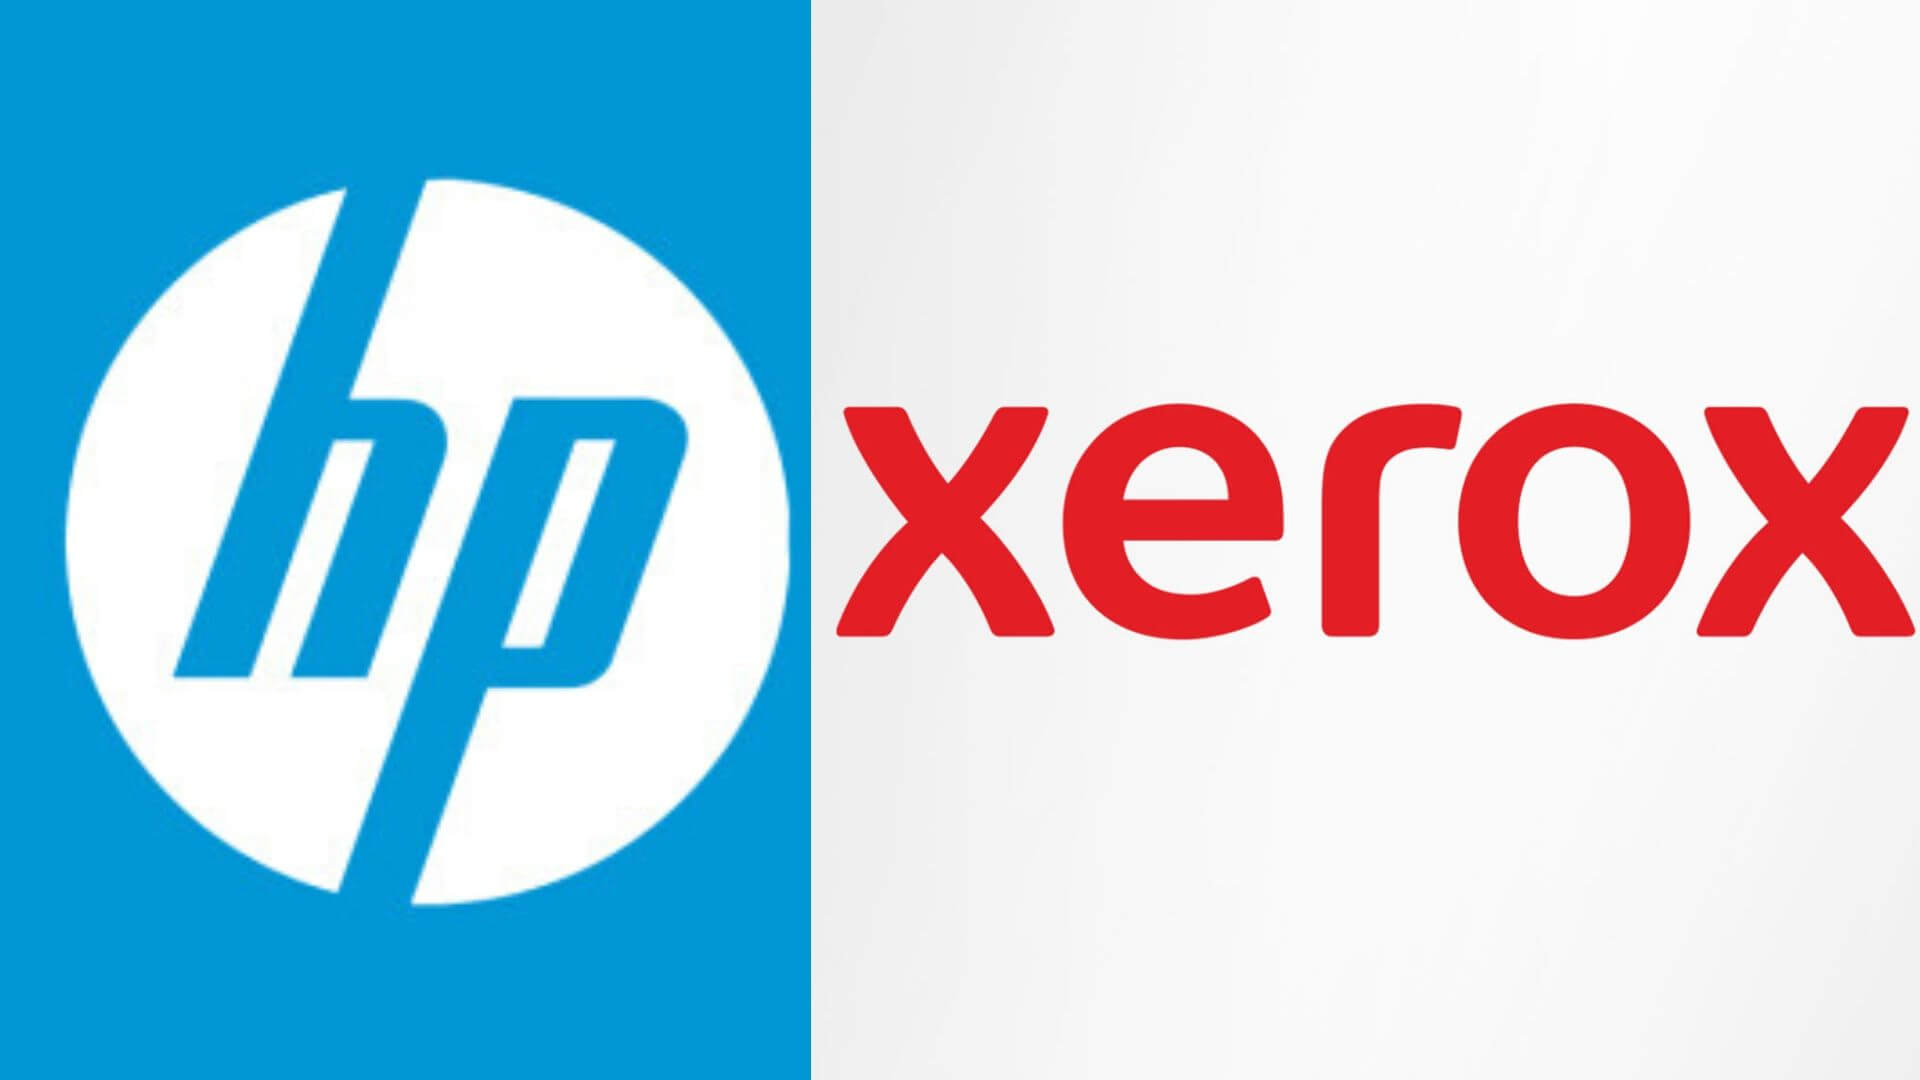 HP rejected the takeover bid by Xerox